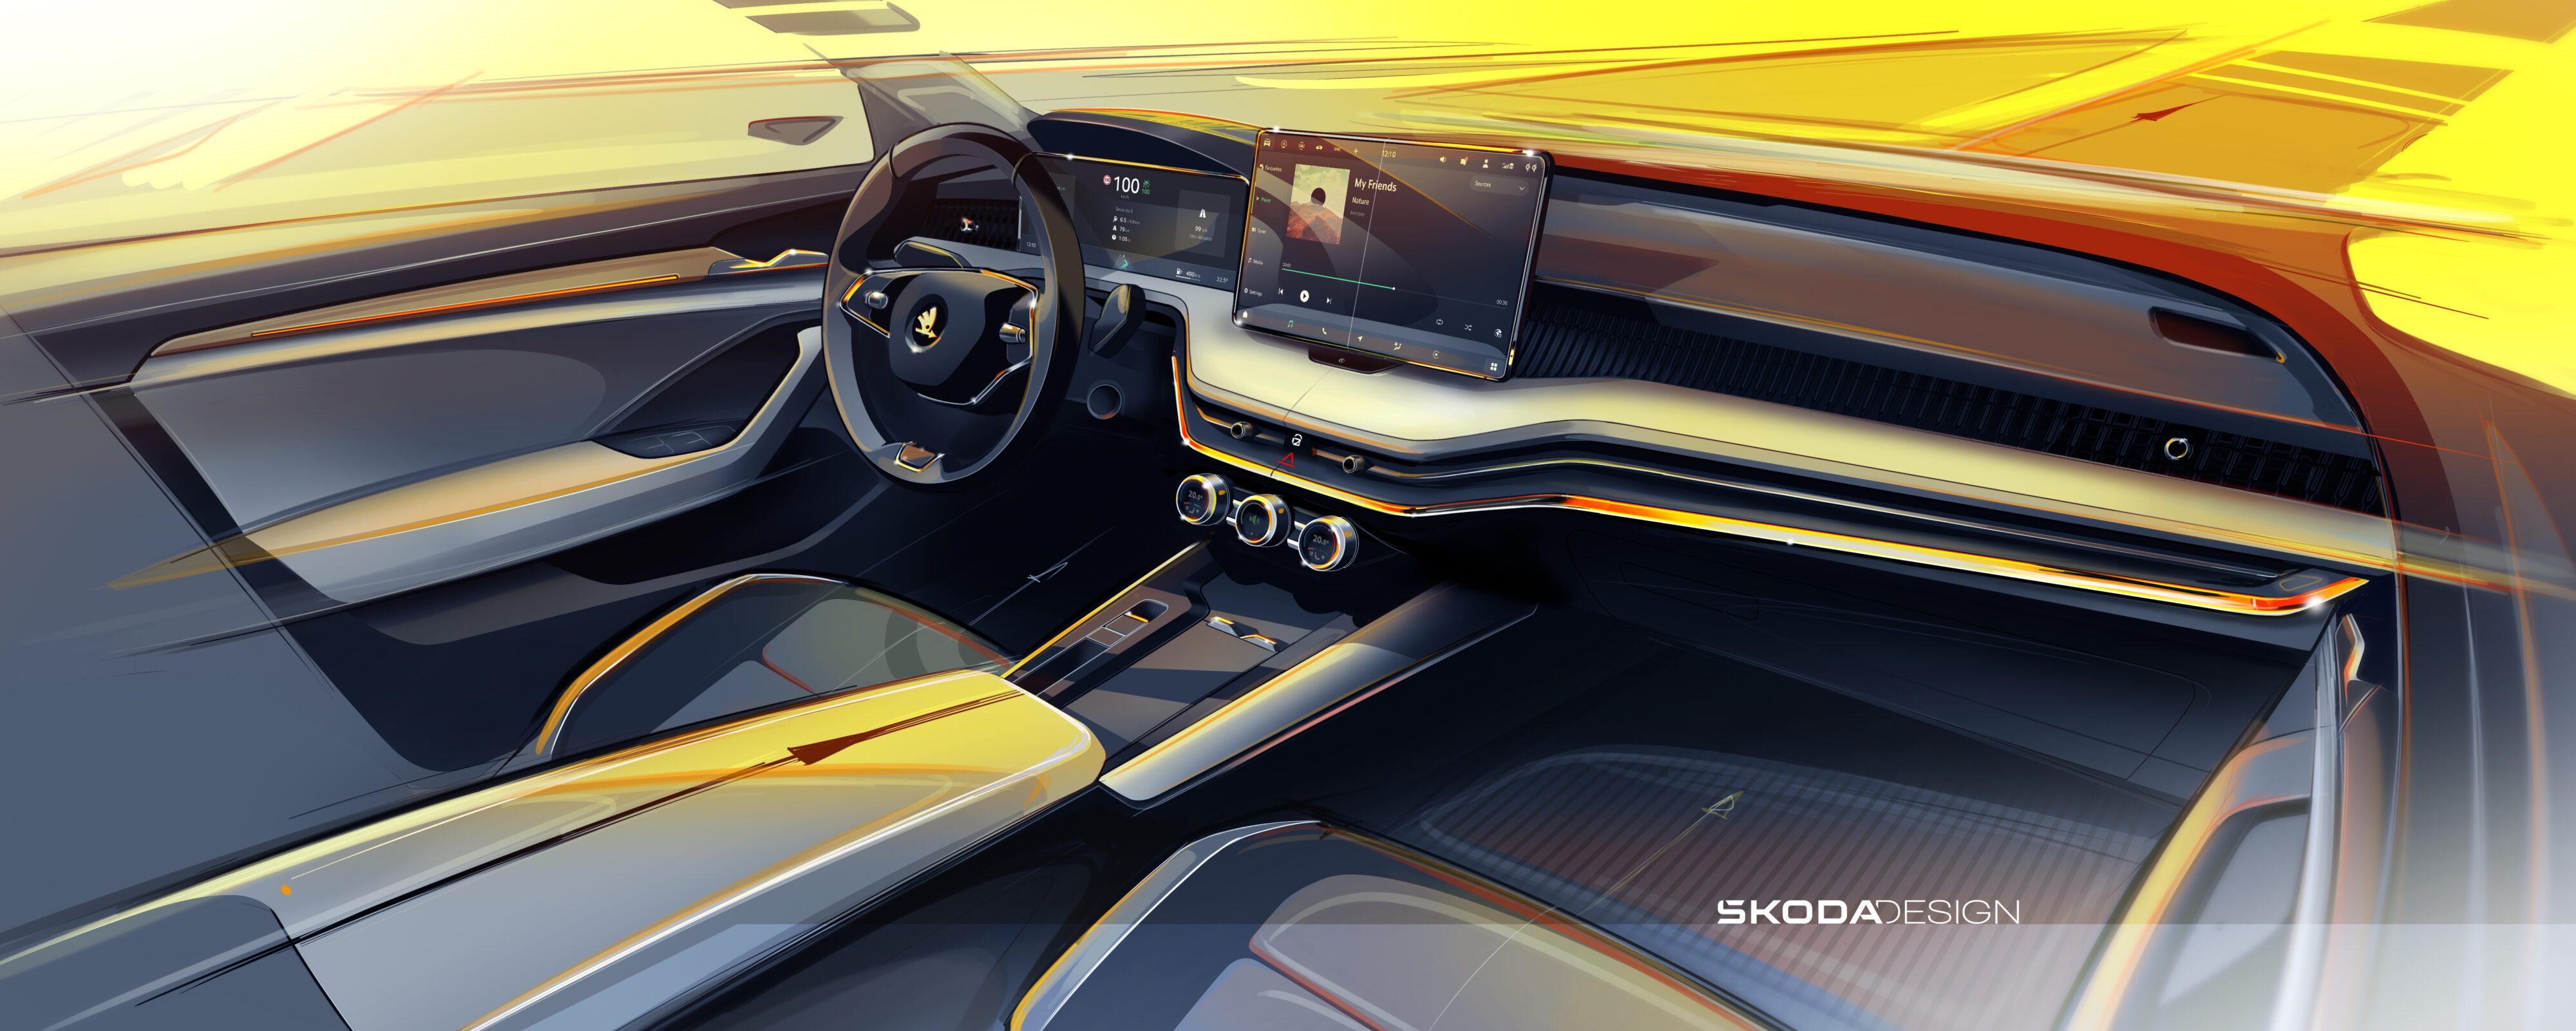 Sketch of the interior of the fourth-generation Skoda Superb.